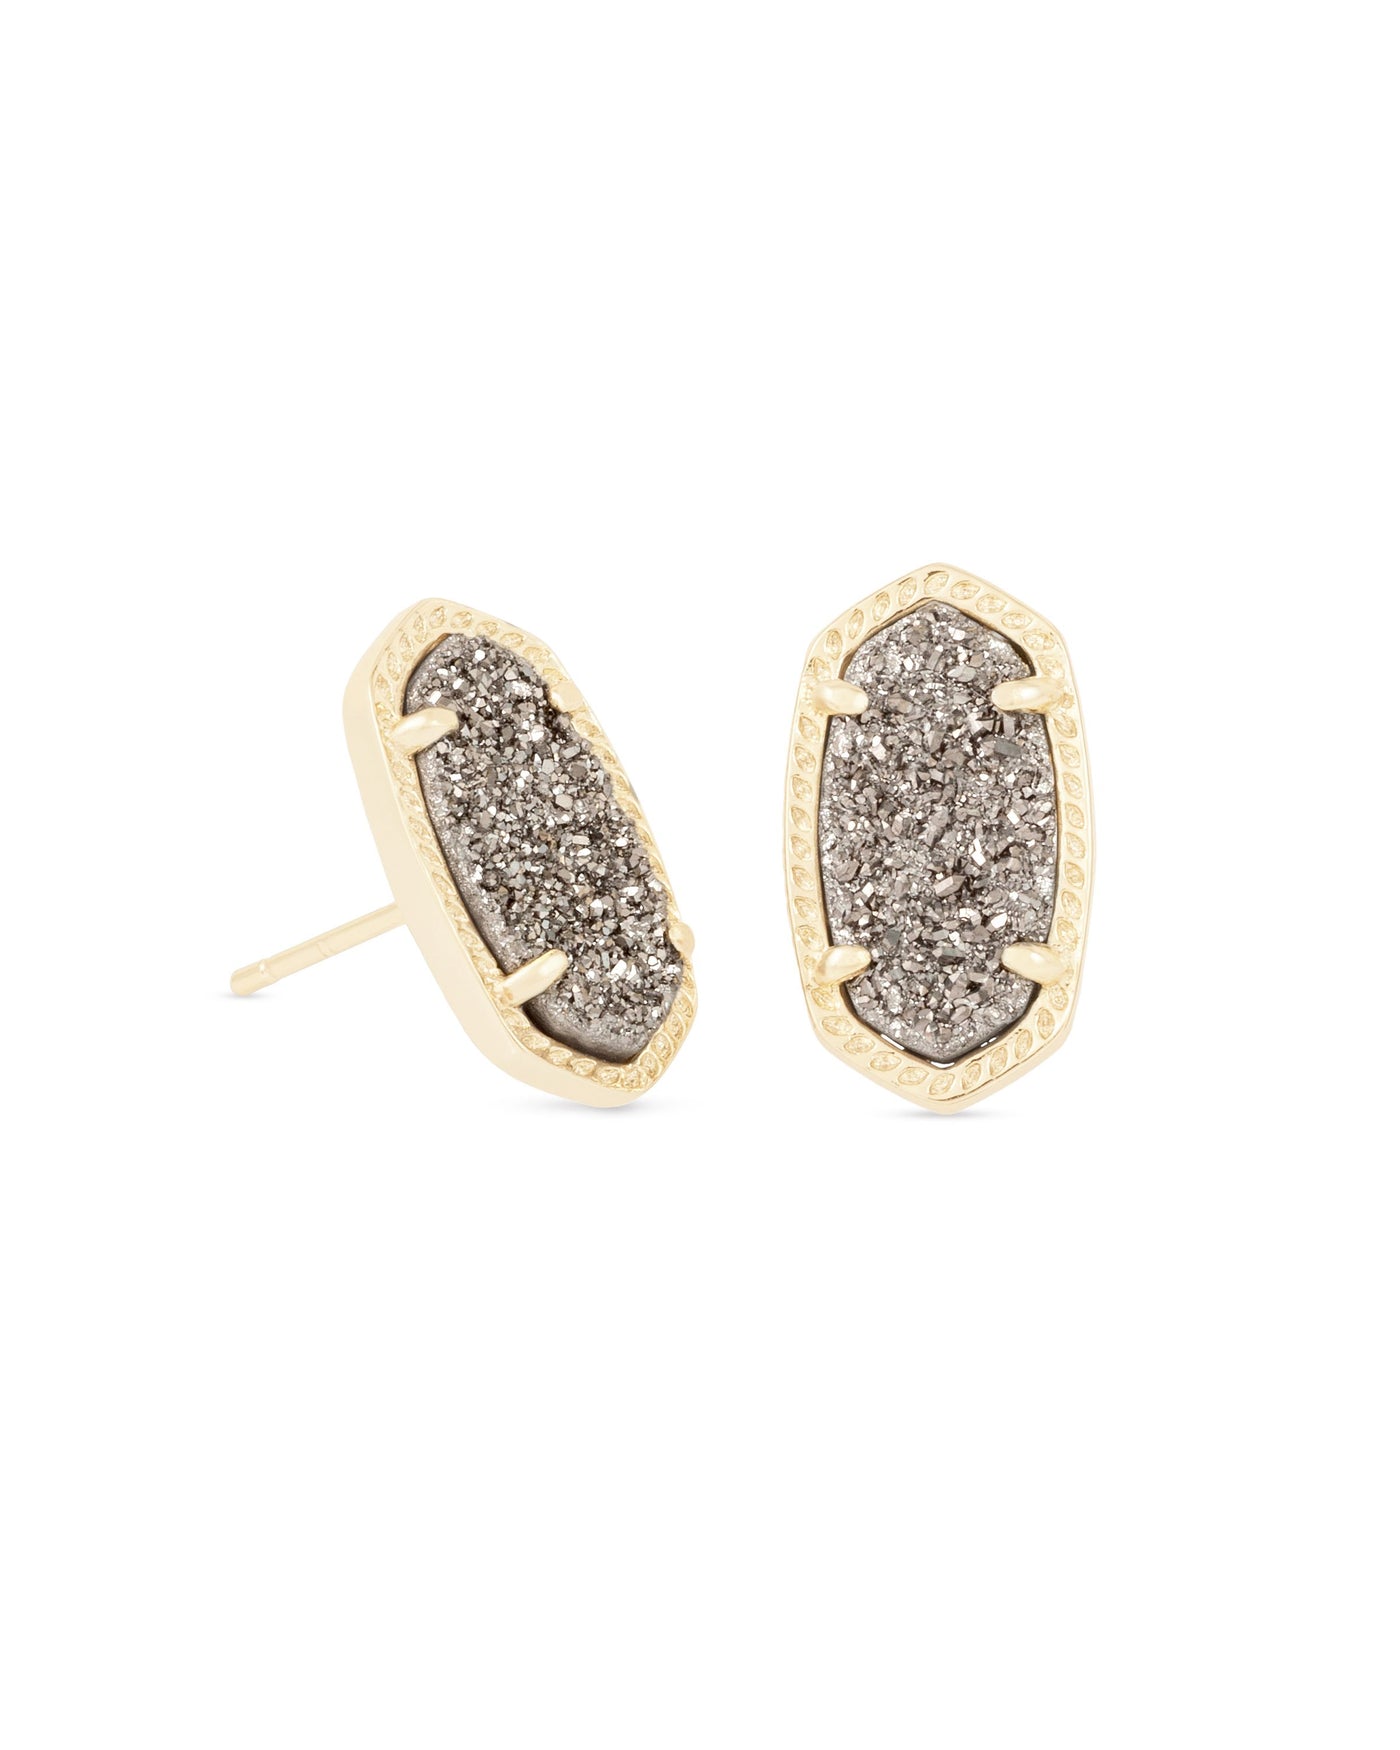 Ellie Stud Earrings Gold Platinum Drusy on white background, front view.